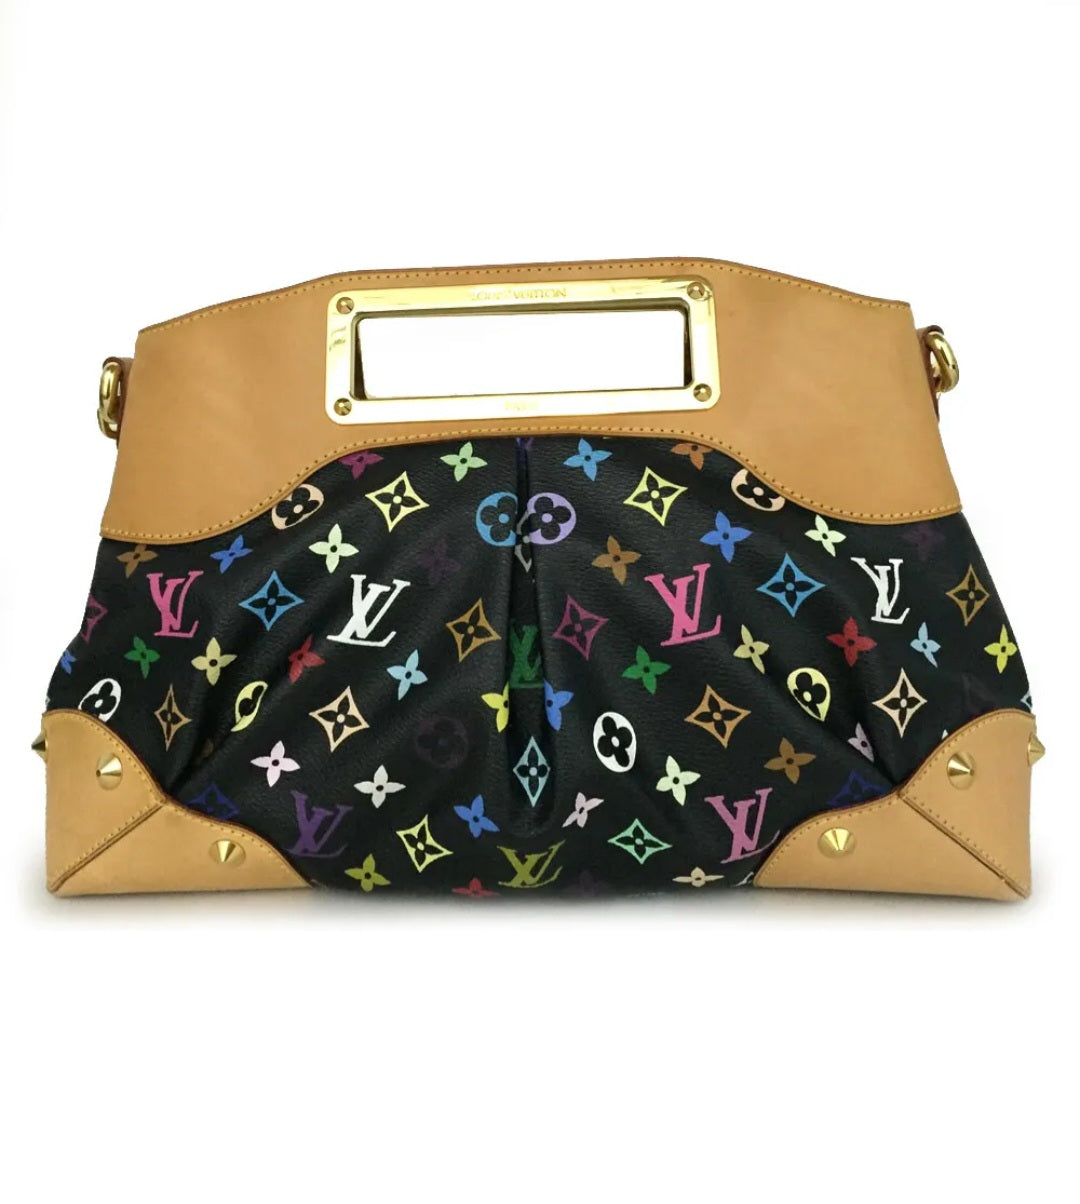 Preowned Louis Vuitton Monogram Multicolor Judy MM 2Way Chain Hand Bag